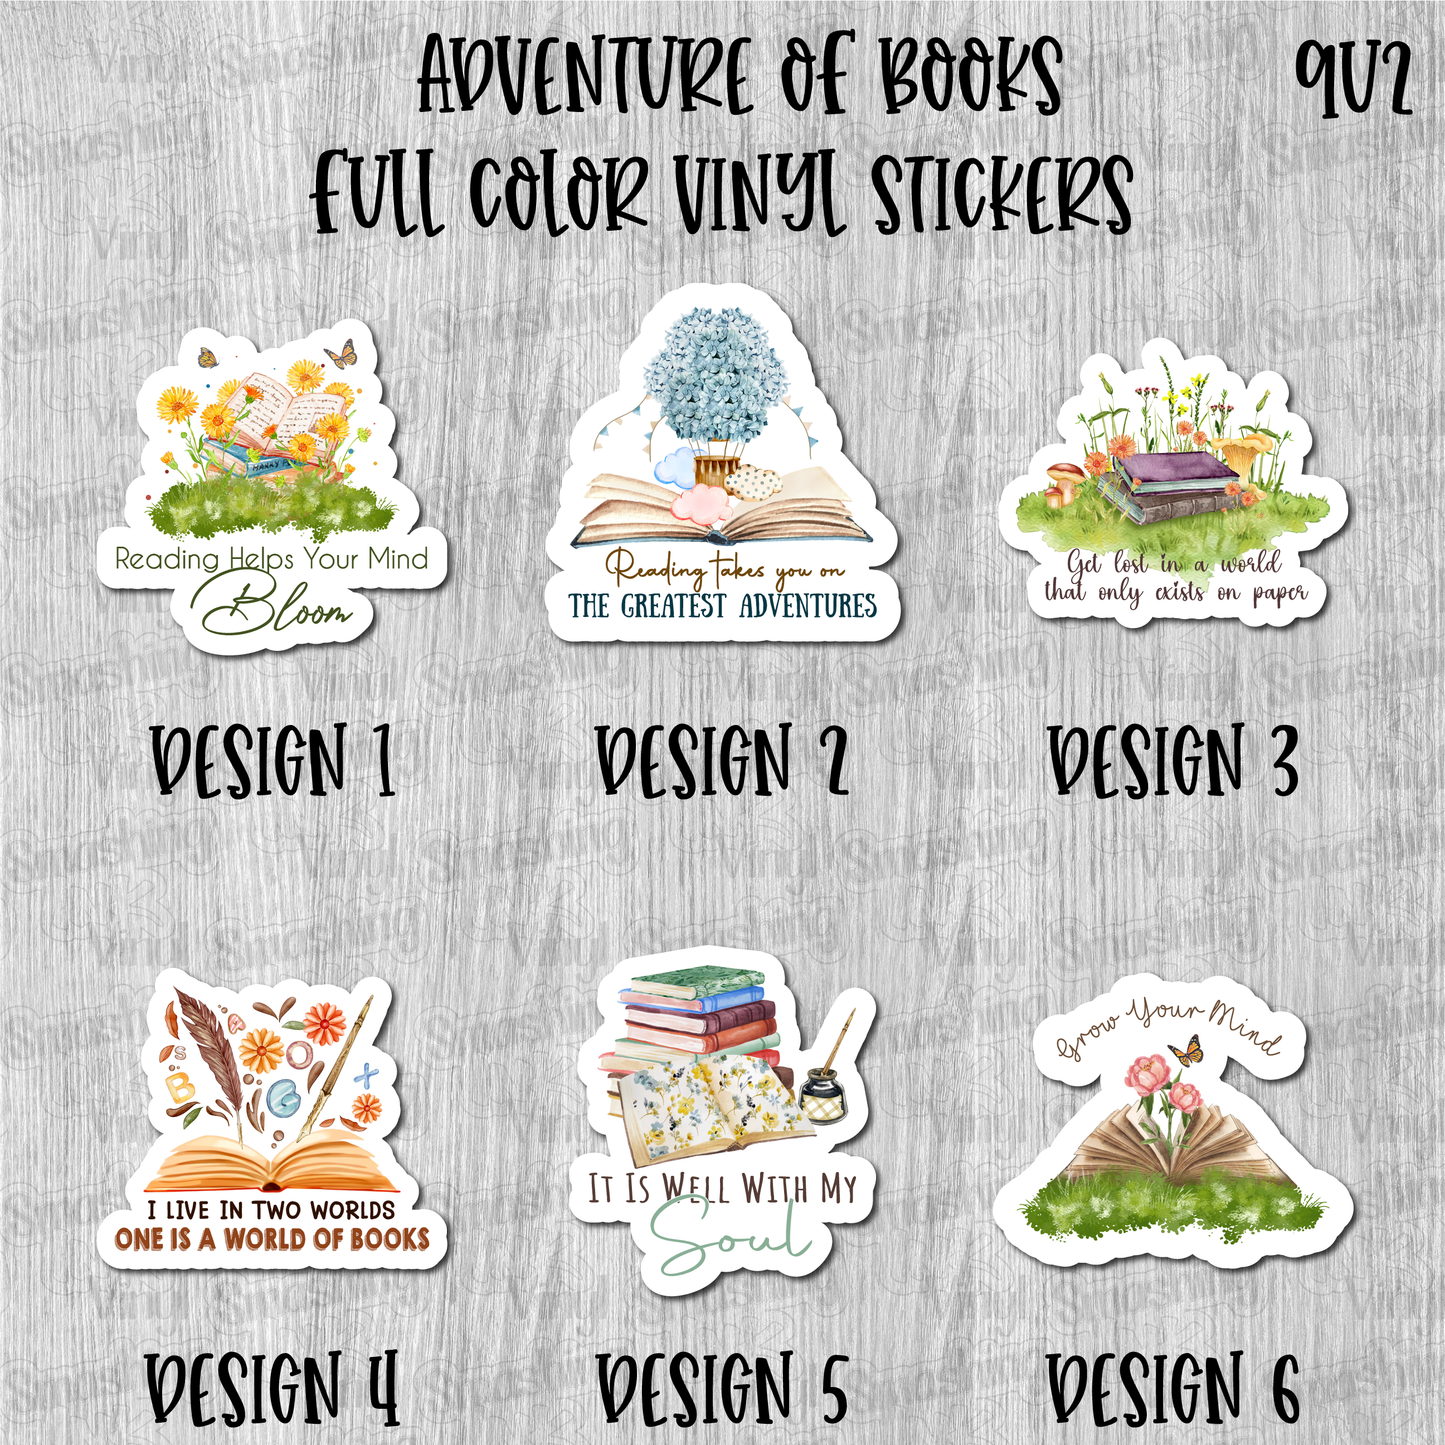 Adventure Of Books - Full Color Vinyl Stickers (SHIPS IN 3-7 BUS DAYS)